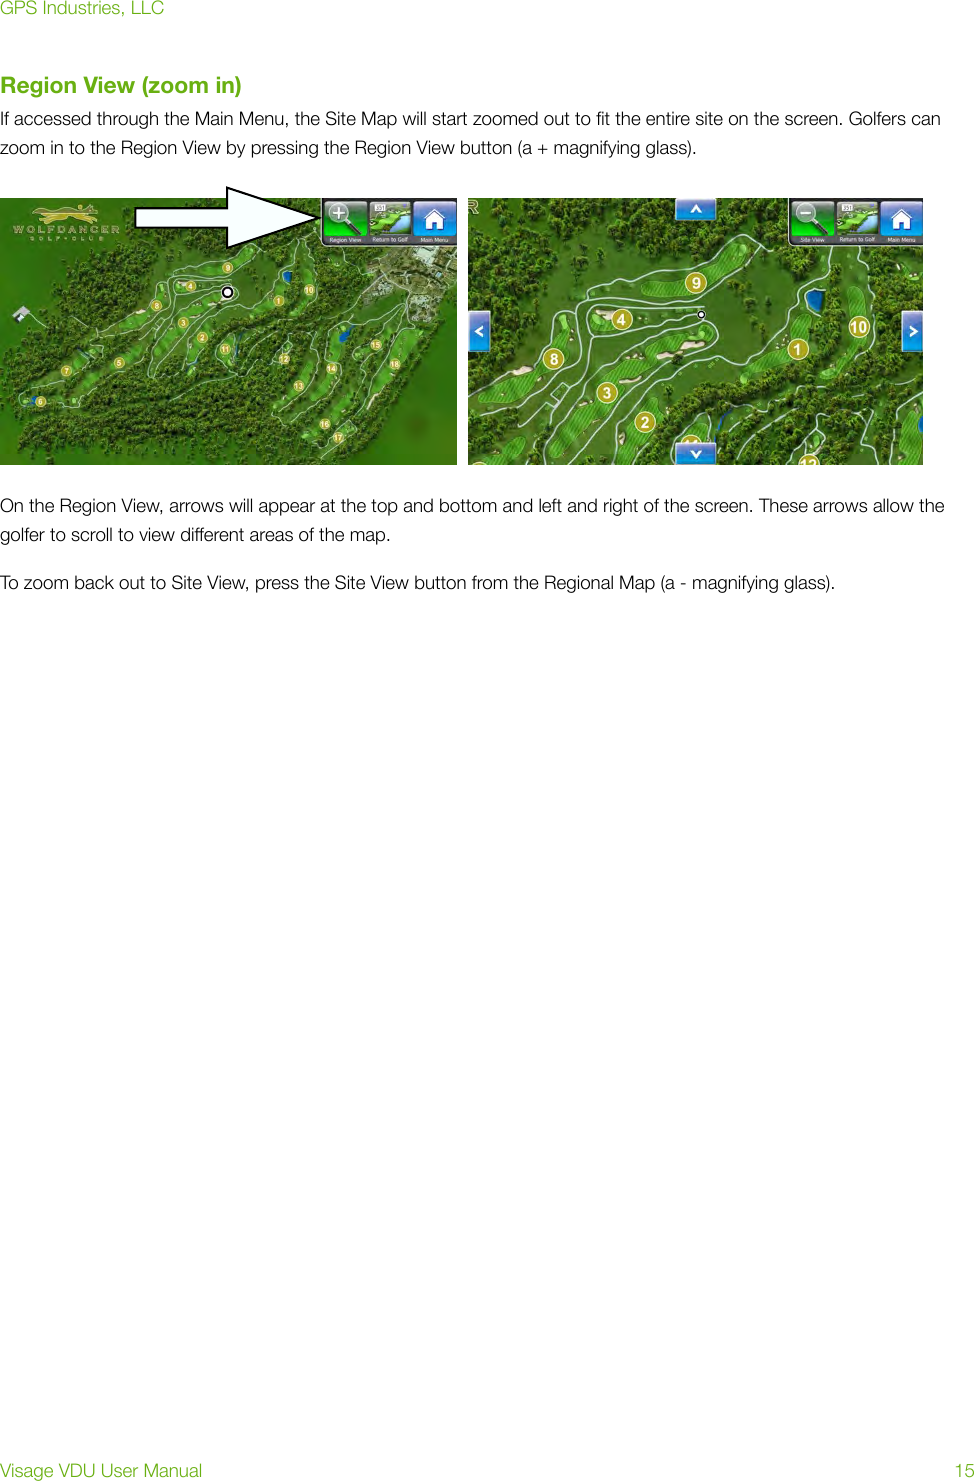 Region View (zoom in)If accessed through the Main Menu, the Site Map will start zoomed out to ﬁt the entire site on the screen. Golfers can zoom in to the Region View by pressing the Region View button (a + magnifying glass). On the Region View, arrows will appear at the top and bottom and left and right of the screen. These arrows allow the golfer to scroll to view different areas of the map. To zoom back out to Site View, press the Site View button from the Regional Map (a - magnifying glass). GPS Industries, LLCVisage VDU User Manual!15